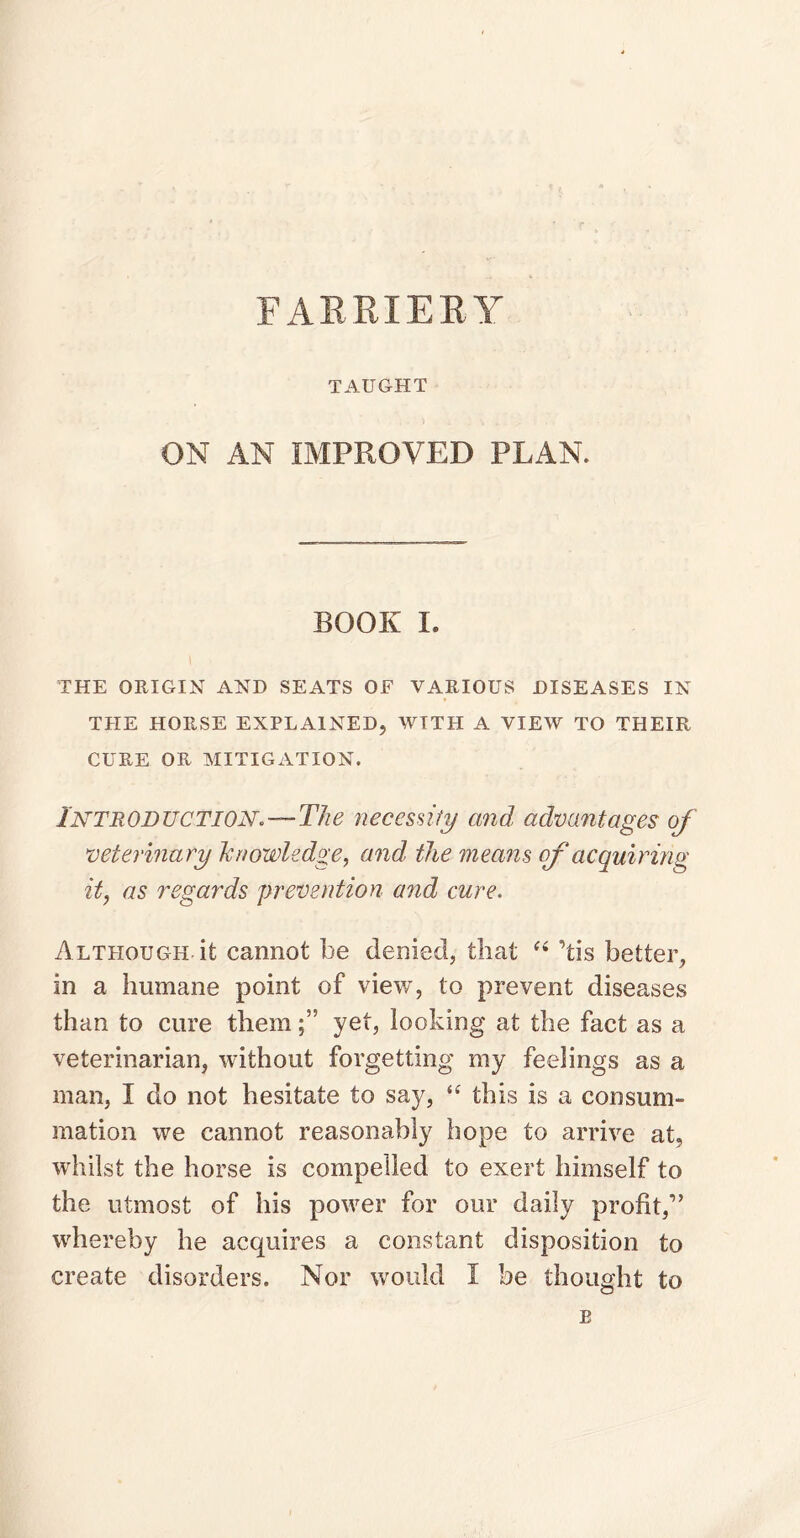 FARRIERY TAUGHT ON AN IMPROVED PLAN. BOOK I. THE ORIGIN AND SEATS OF VARIOUS DISEASES IN THE HORSE EXPLAINED, WITH A VIEW TO THEIR CURE OR MITIGATION. Introduction*—The necessity and advantages of veterinary knowledge, and, the means of acquiring it, as regards prevention and cure. Although it cannot be denied, that “ ’tis better, in a humane point of view, to prevent diseases than to cure themyet, looking at the fact as a veterinarian, without forgetting my feelings as a man, I do not hesitate to say, “ this is a consum¬ mation we cannot reasonably hope to arrive at, whilst the horse is compelled to exert himself to the utmost of his power for our daily profit,” whereby he acquires a constant disposition to create disorders. Nor would I be thought to